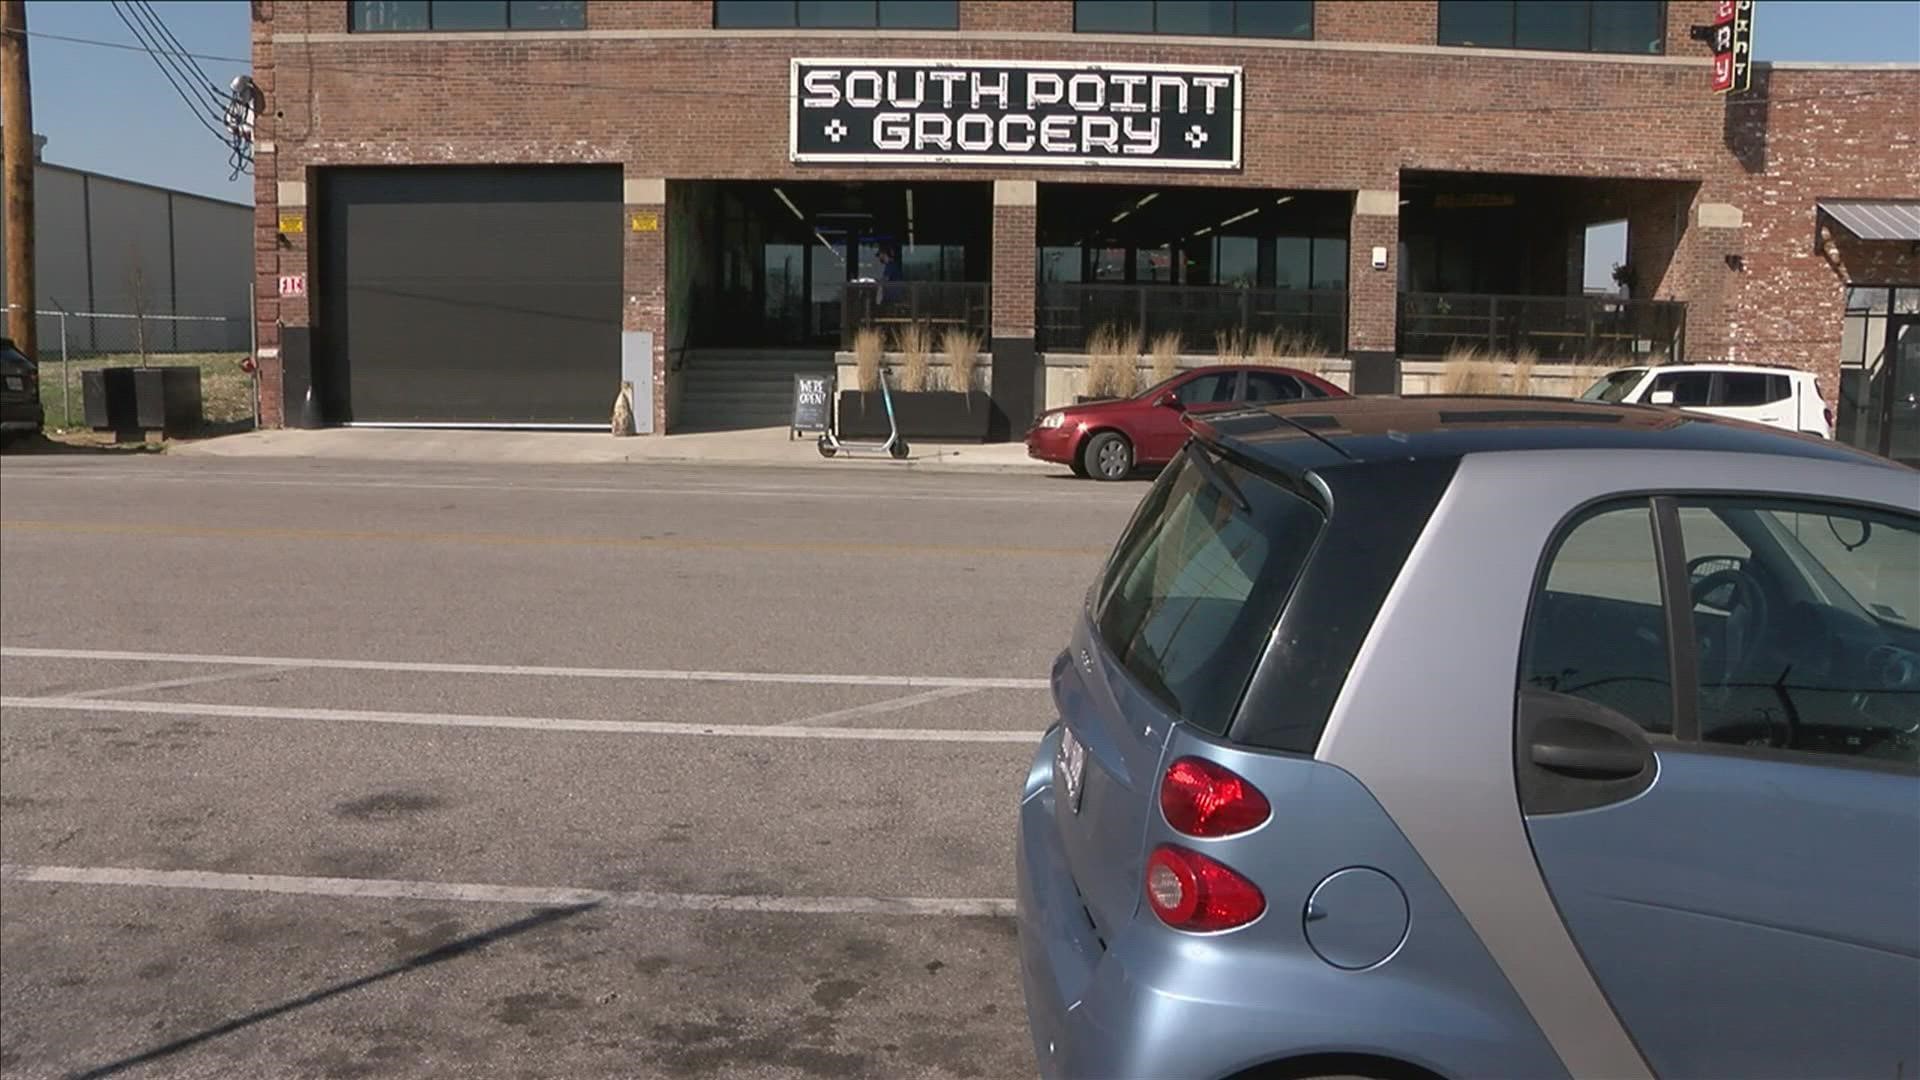 South Point Grocery opened its doors Thursday for its first customers.